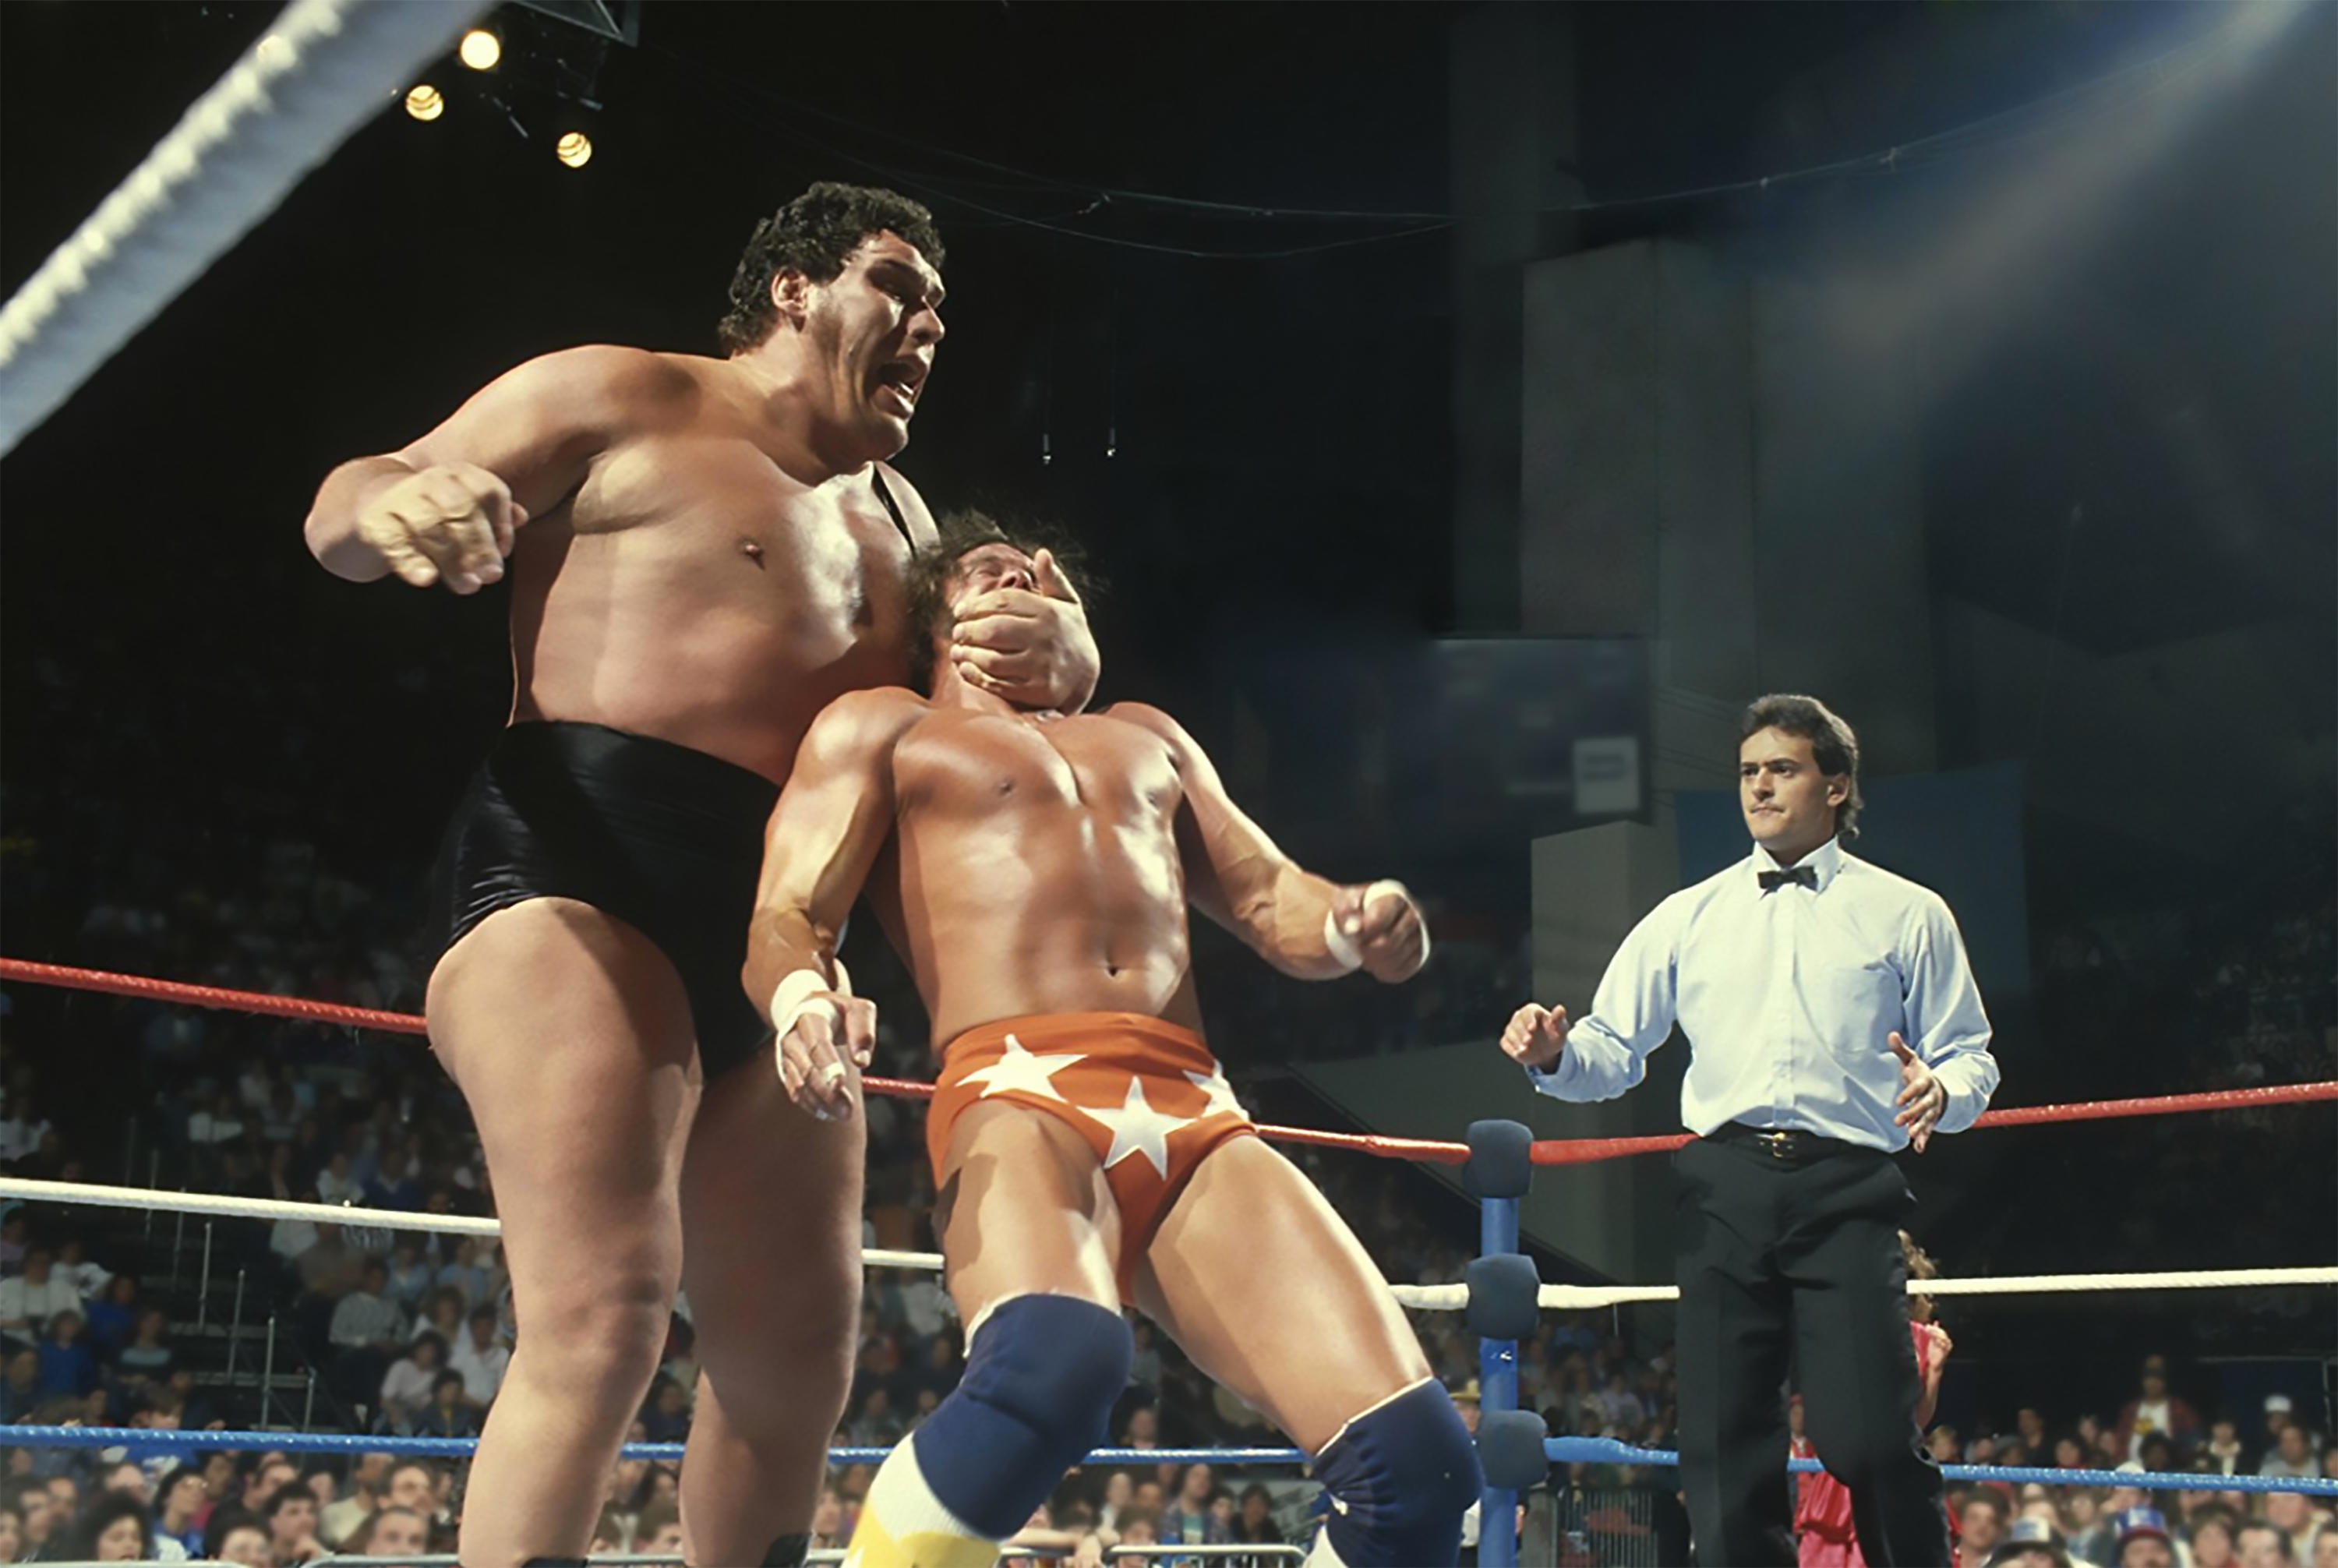 Andre the Giant manhandles &quot;Macho Man&quot; Randy Savage during a wrestling match